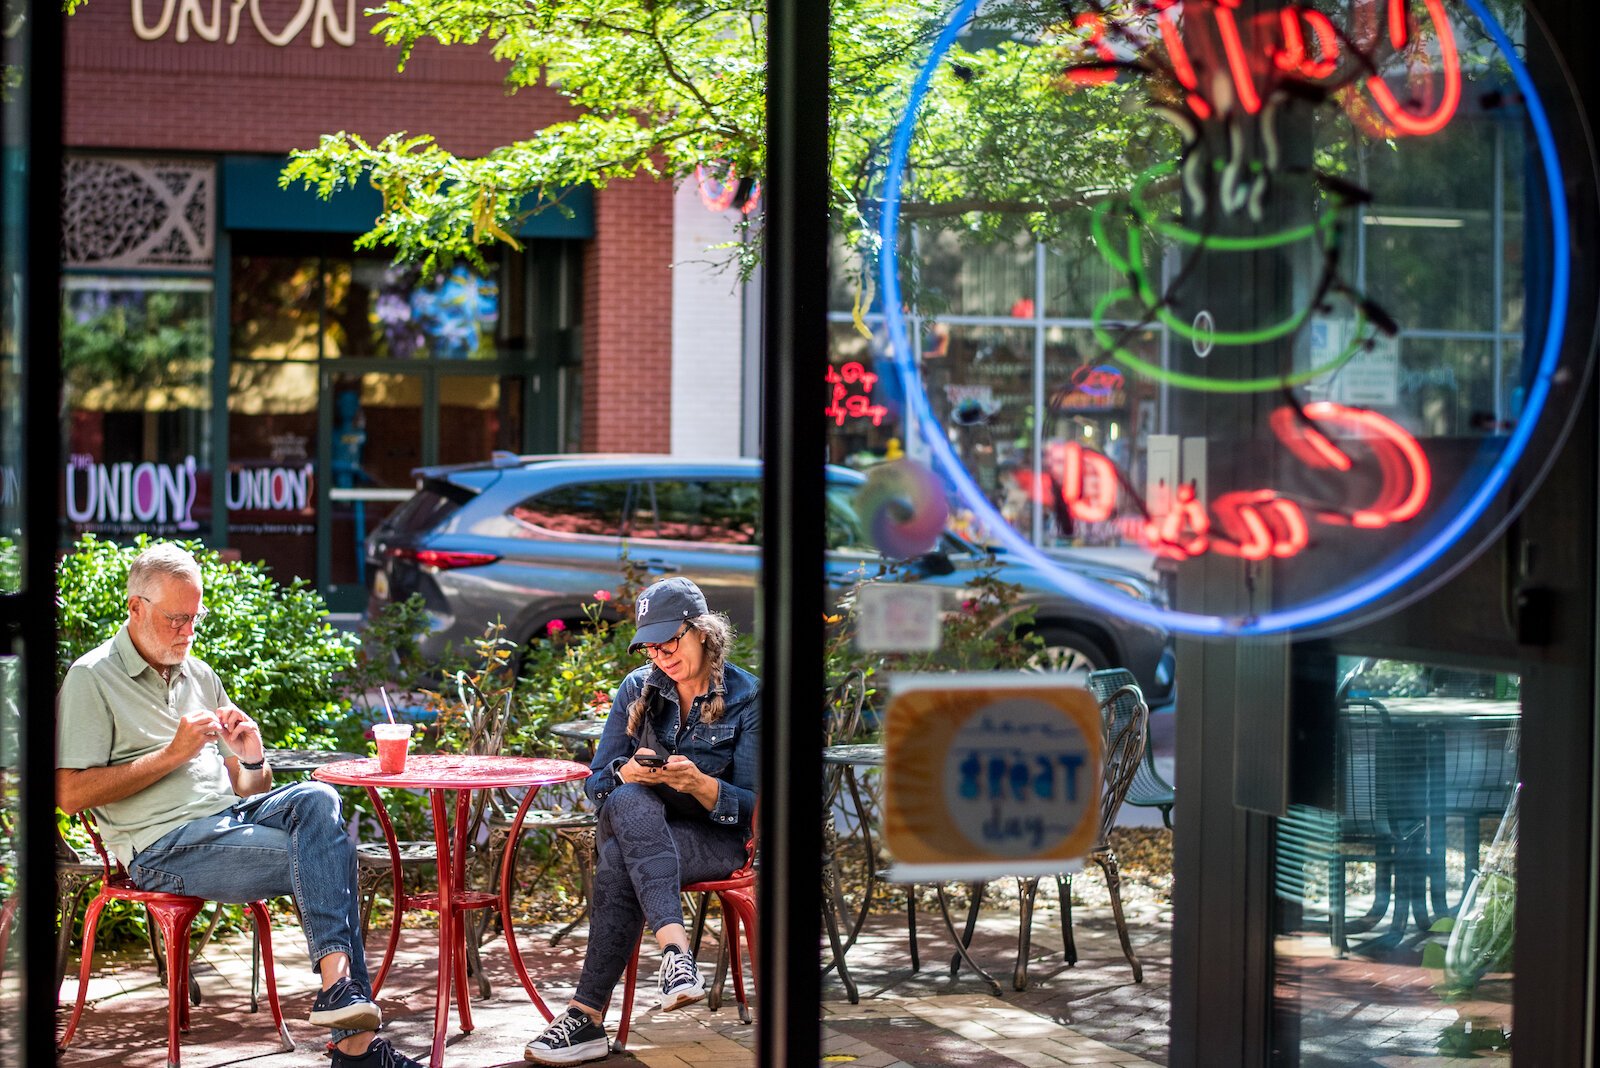 When the weather permits, outdoor seating at Caffé Casa offers a prime view of the Kalamazoo Mall.